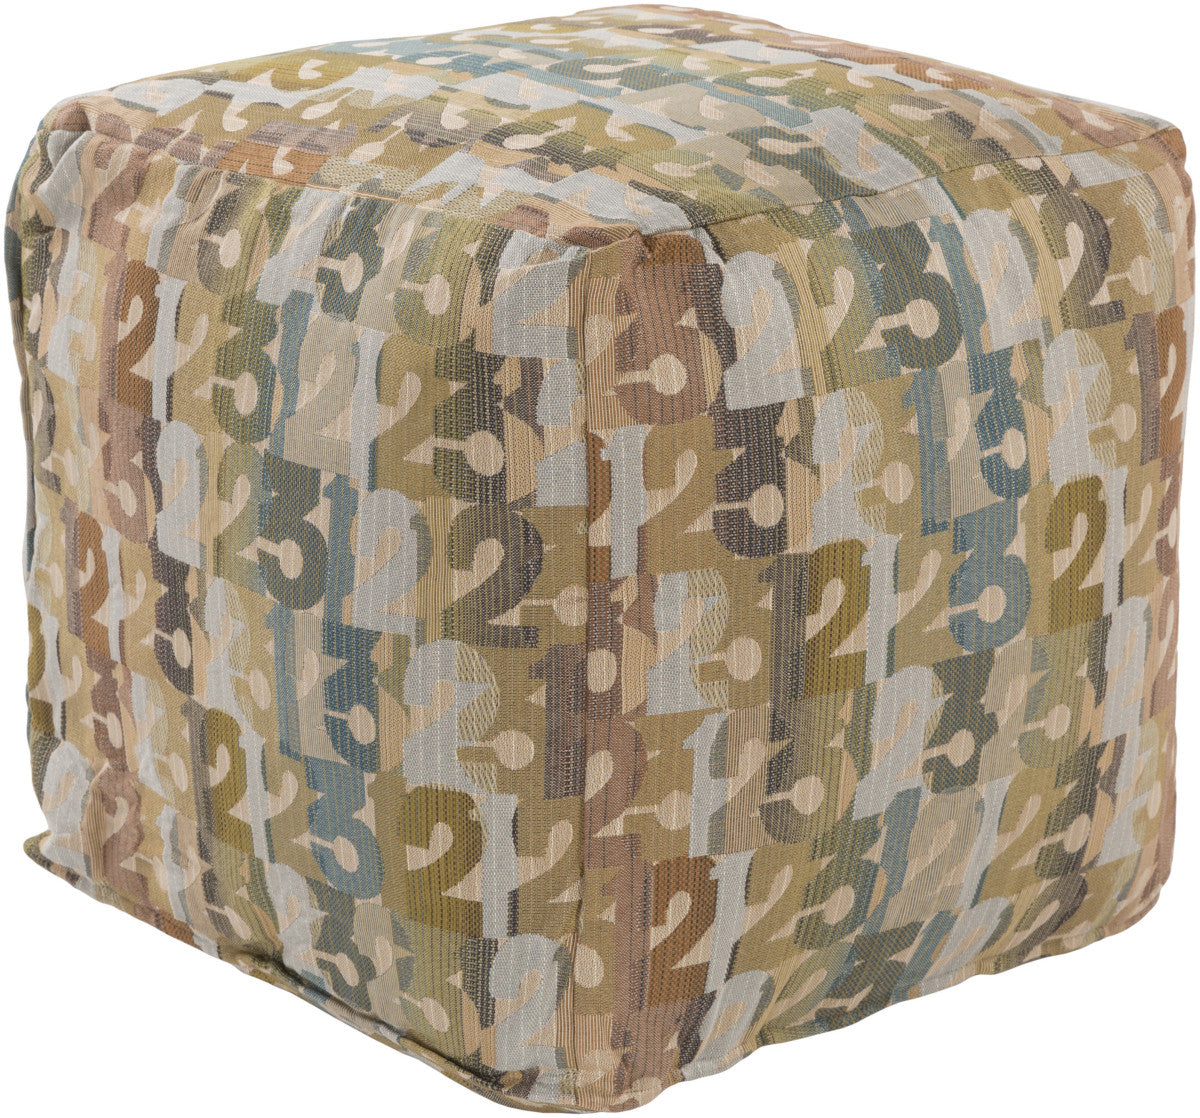 Surya Shoop SHPF-001 Multi-Color Pouf by Mike Farrell